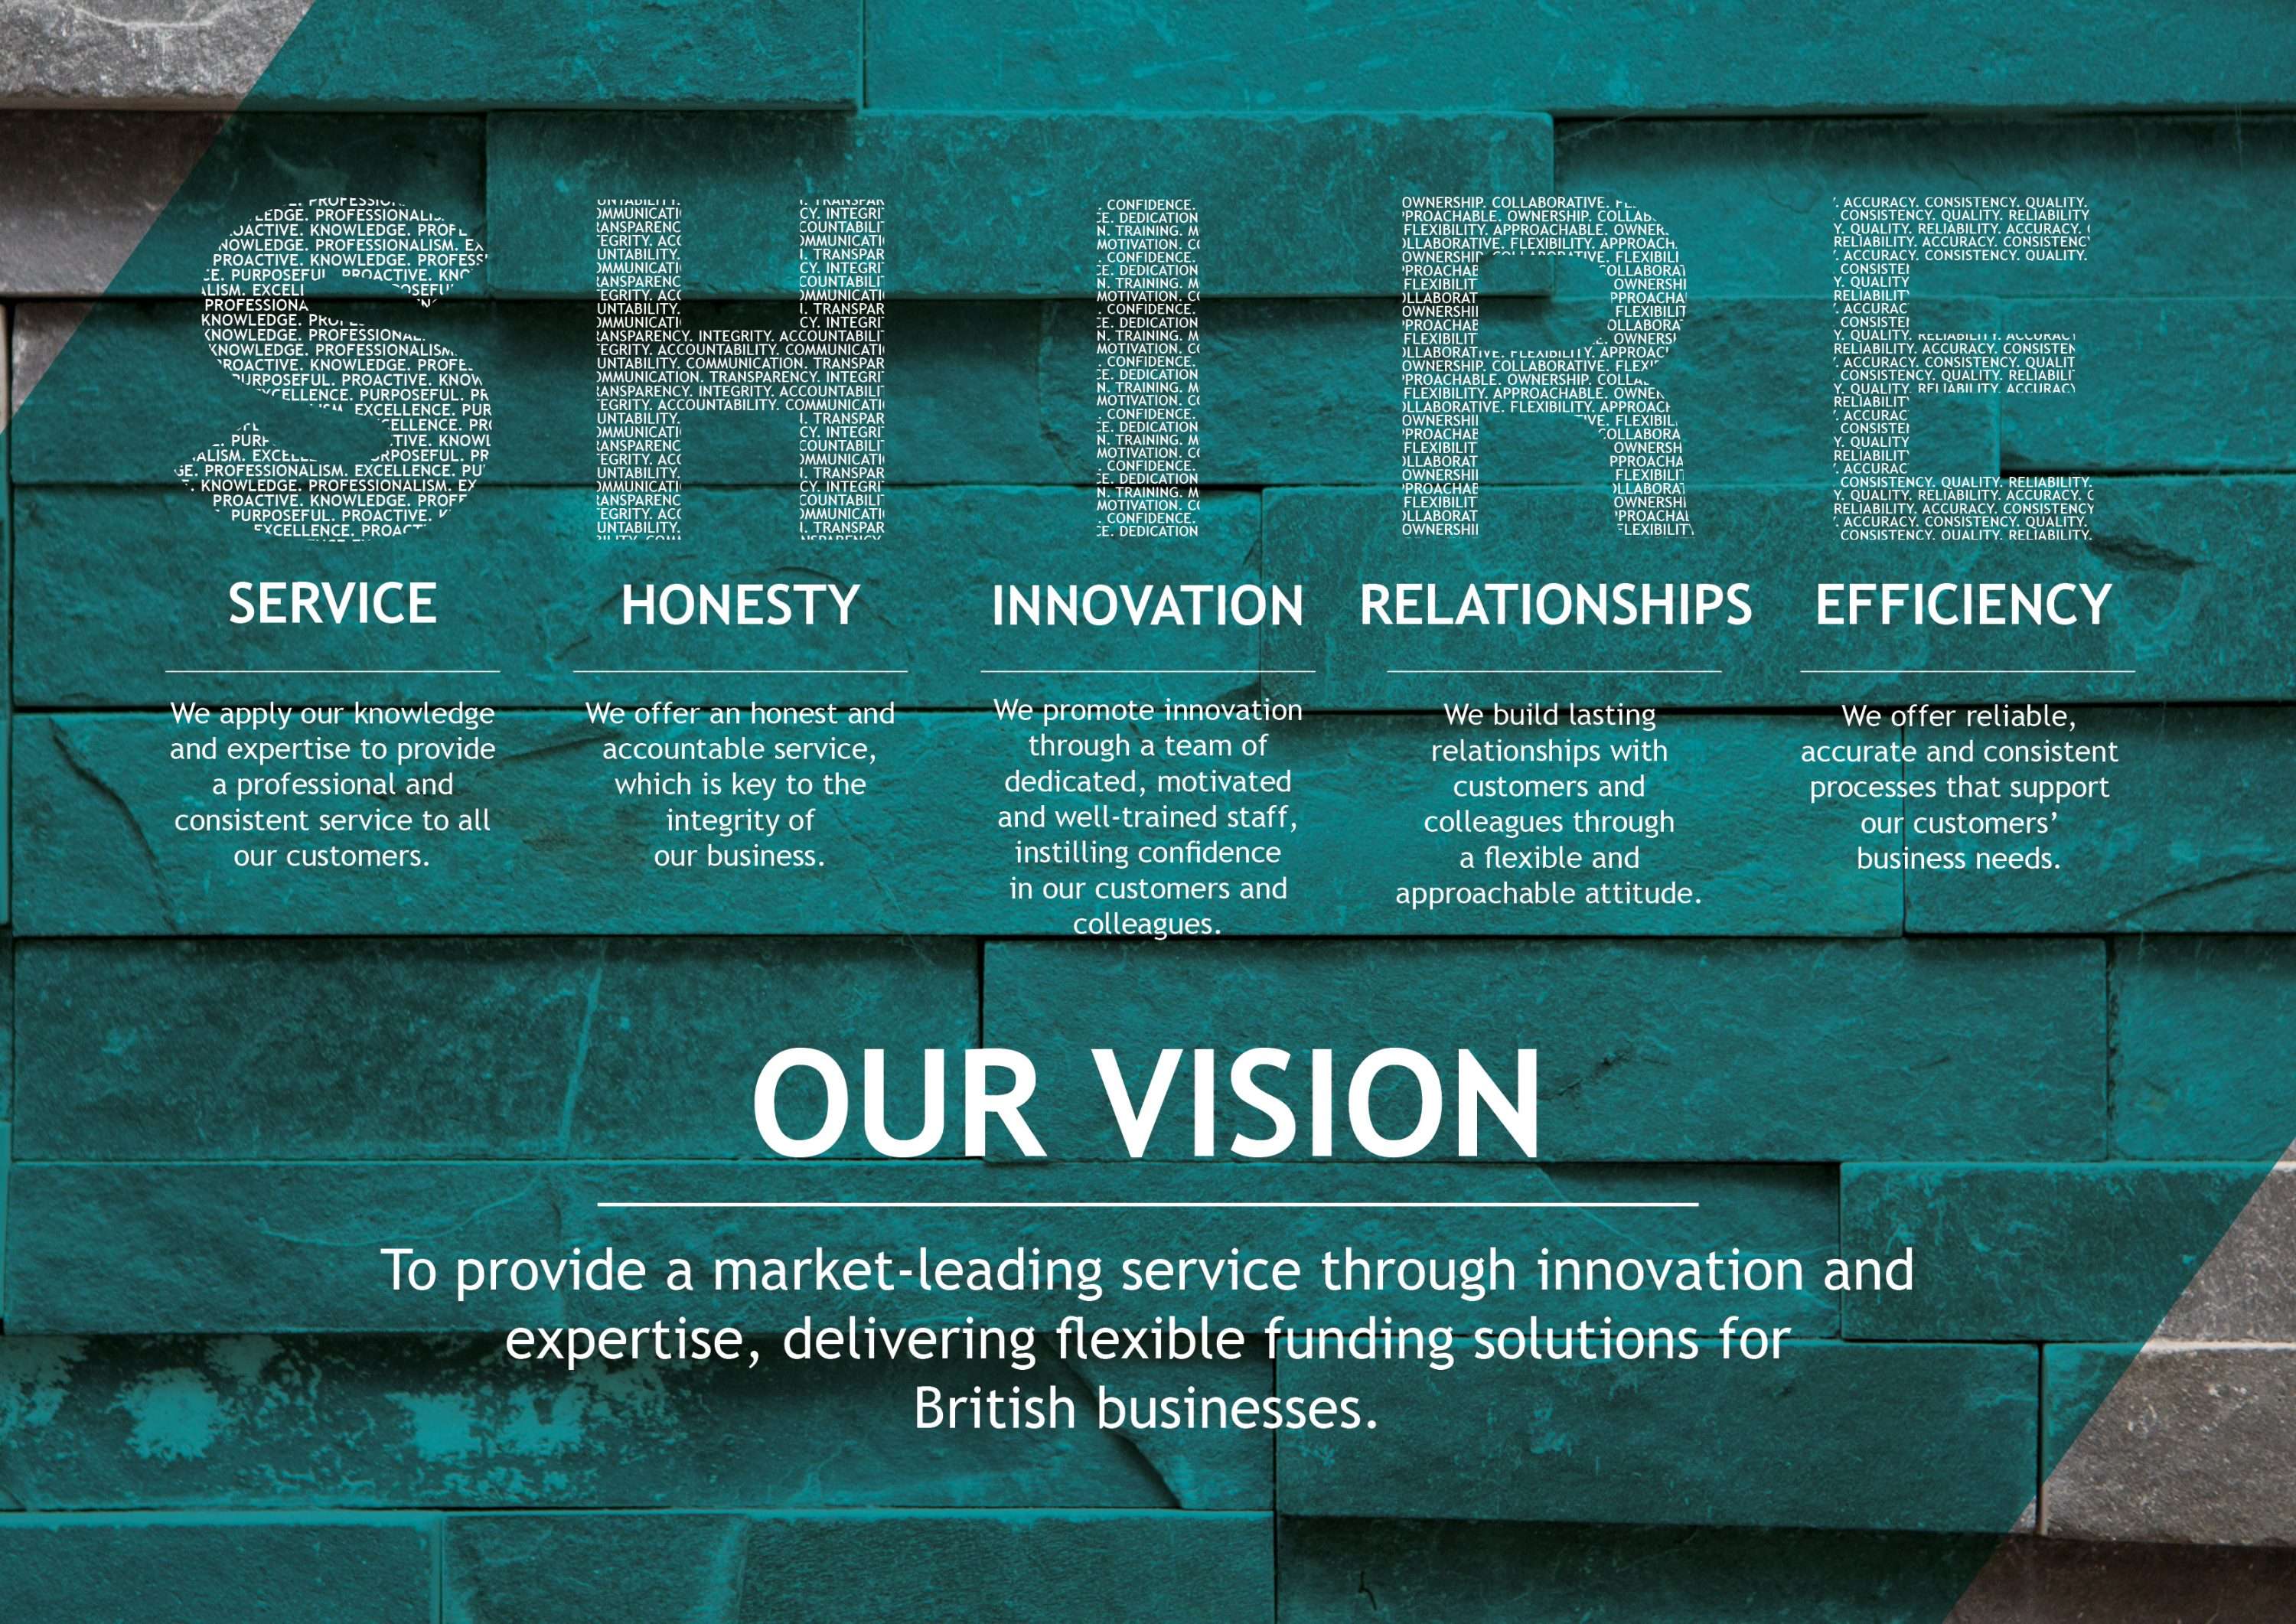 Director Stakeholder Relations and corporate vision at Shire Leasing